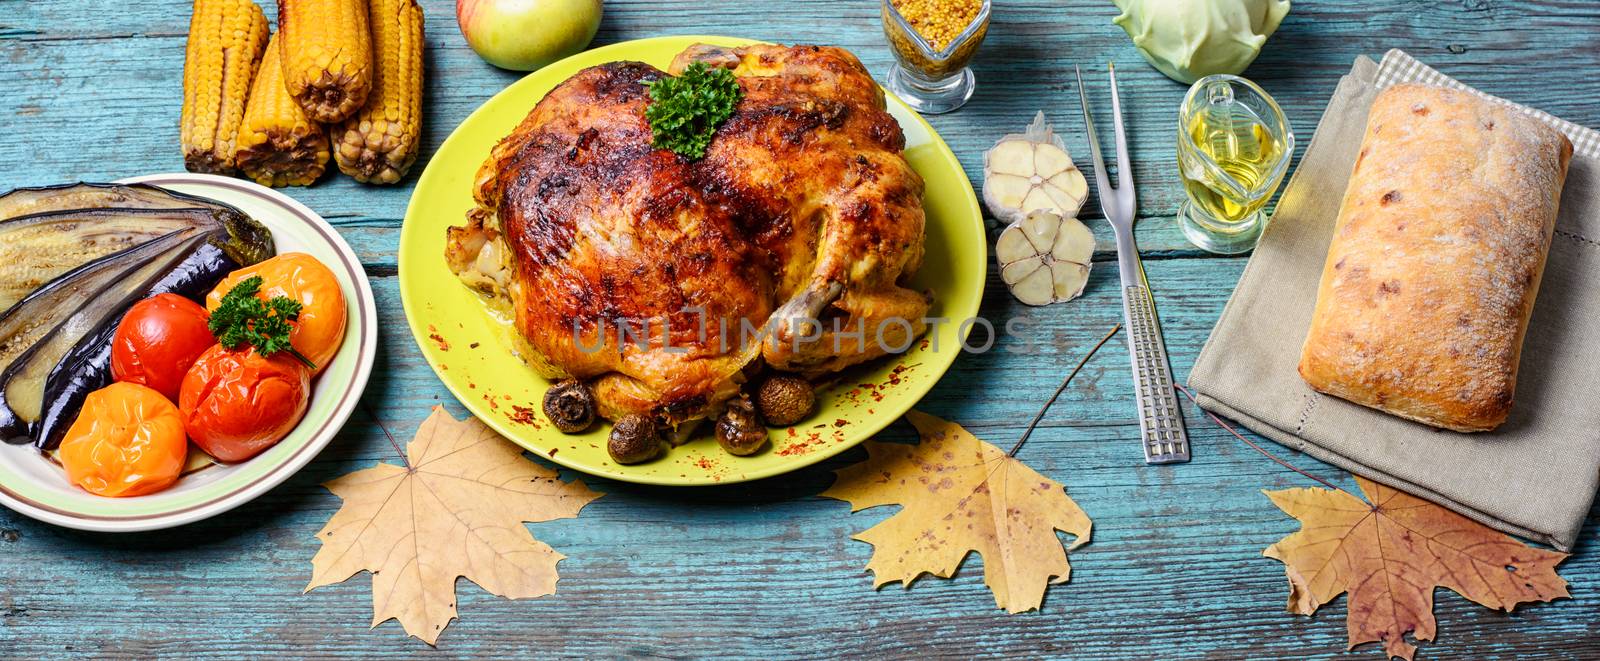 Kitchen table with baked chicken in vegetables and strewn with autumn leaves